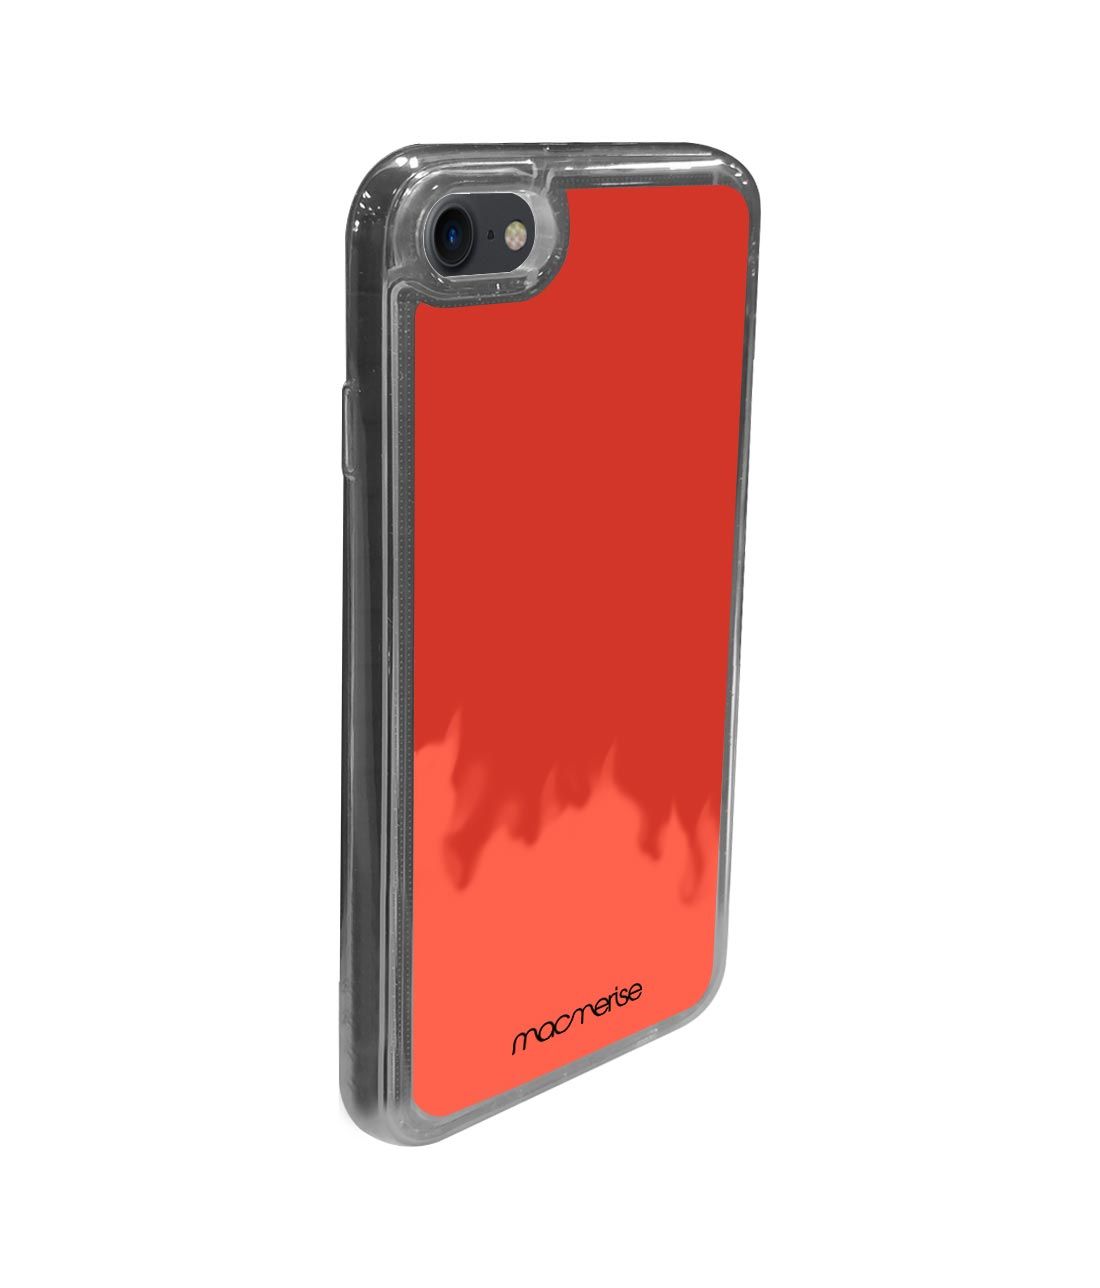 Neon Sand Red - Neon Sand Phone Case for iPhone 7